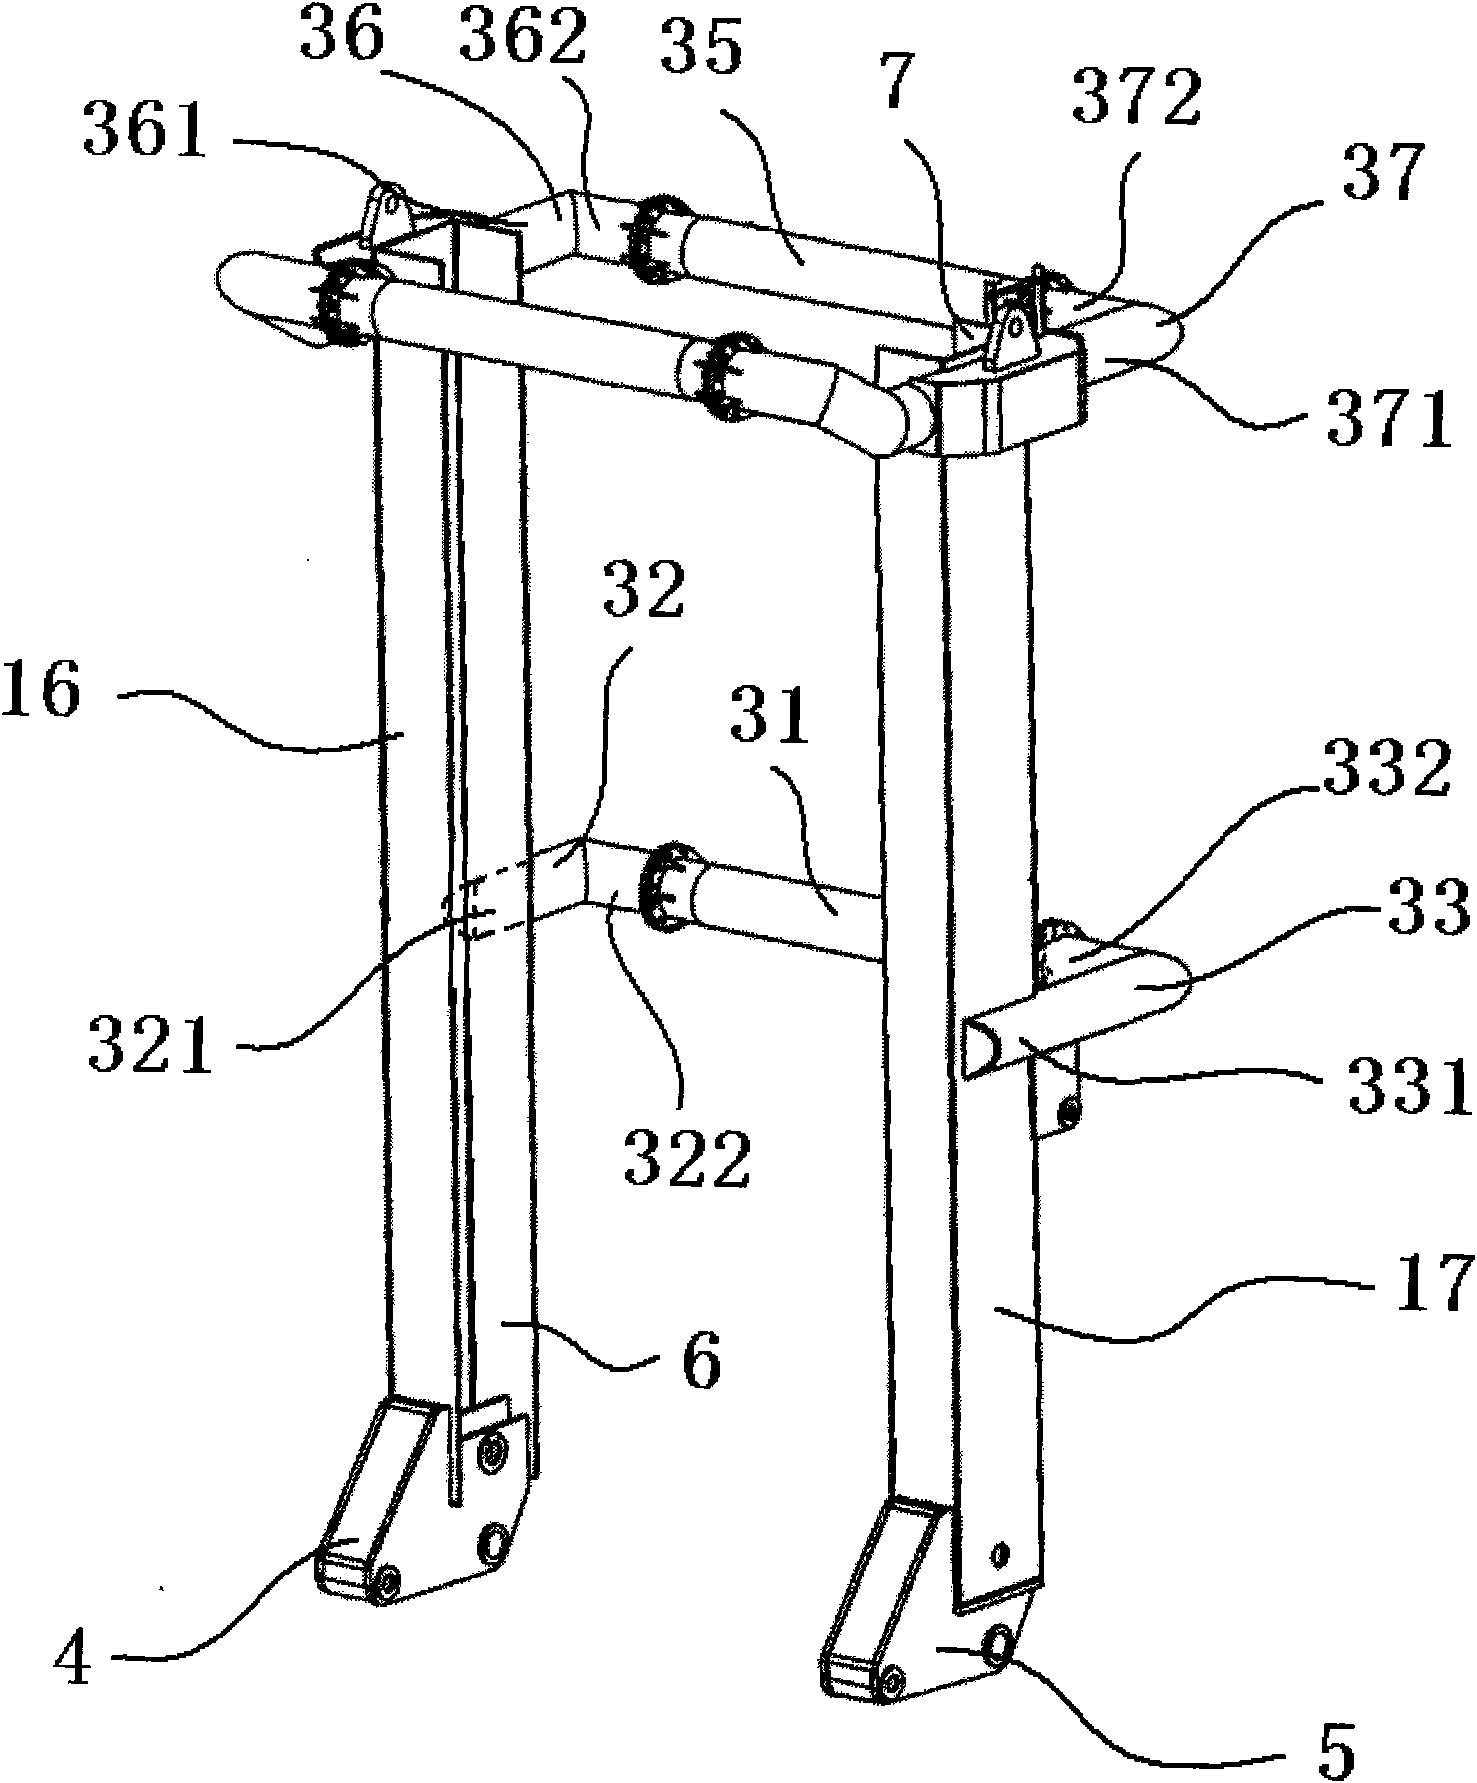 Driller support device